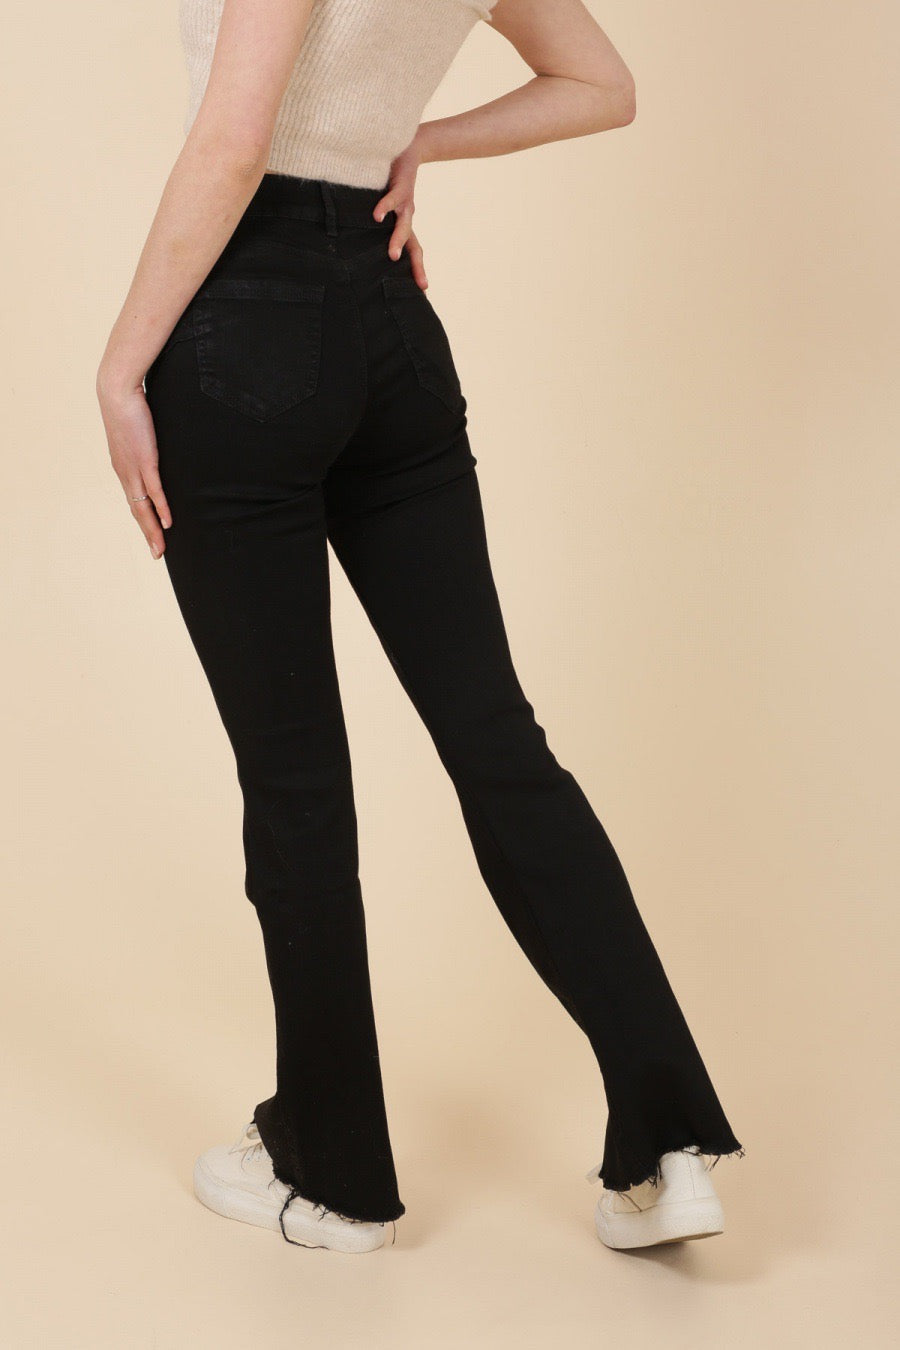 Black jeans with width and frayed wear